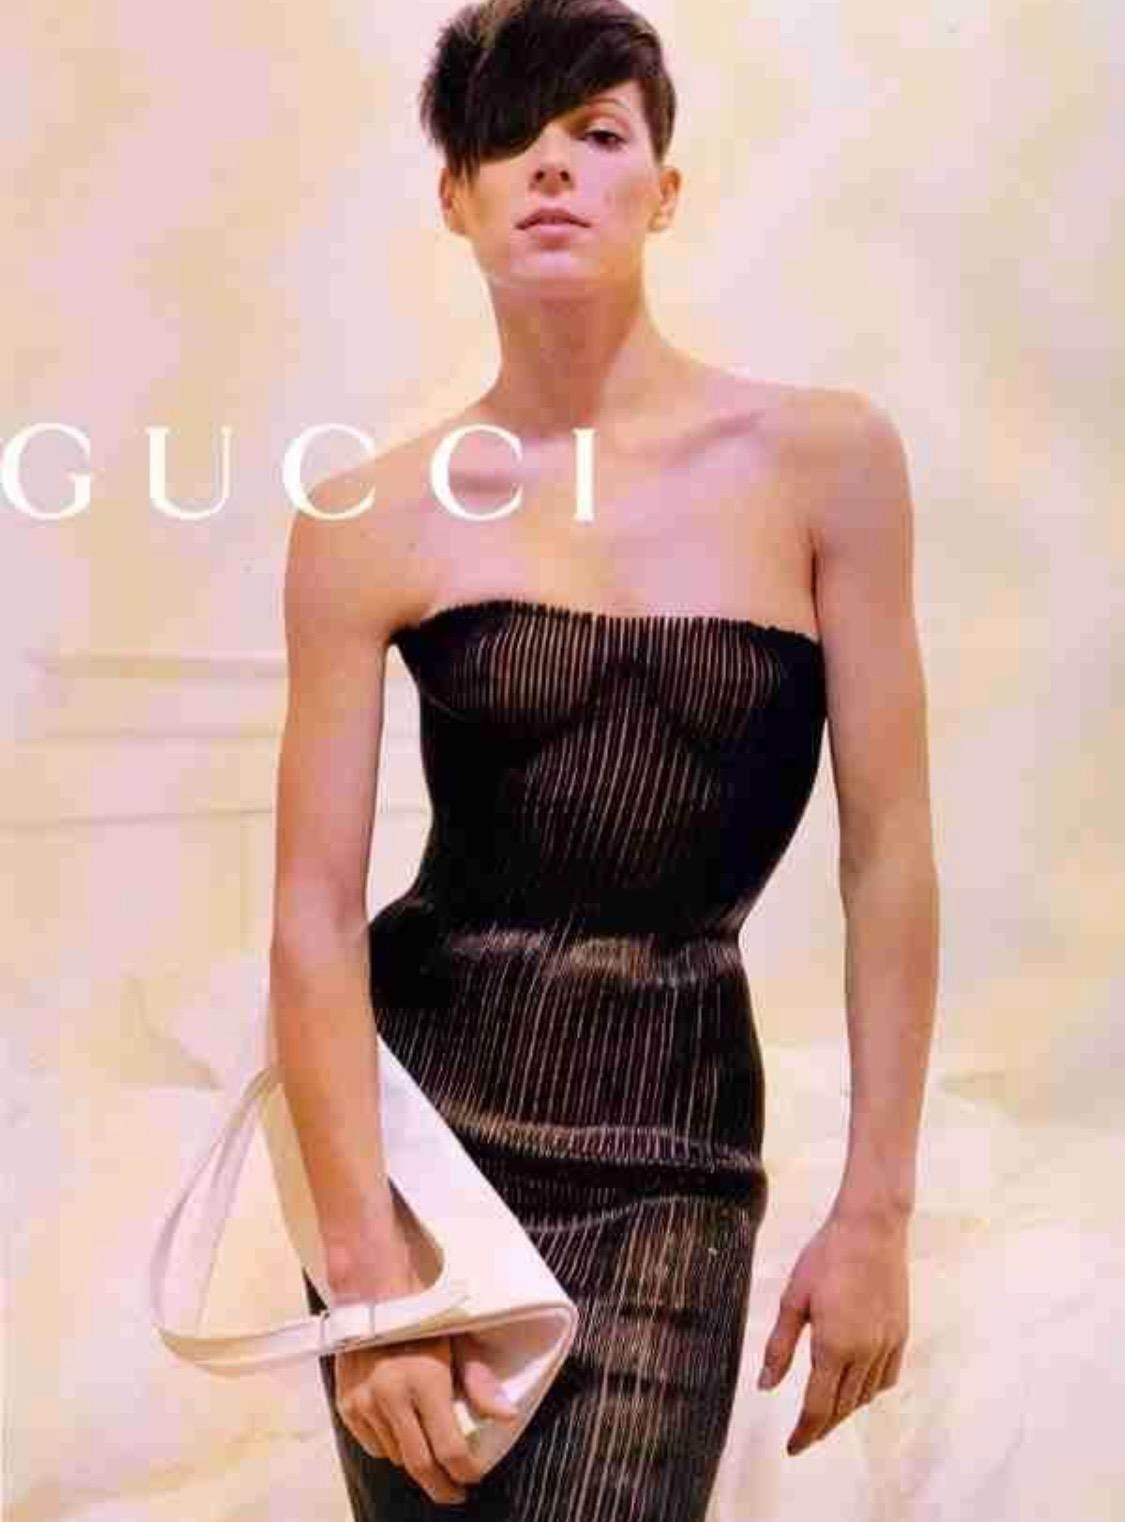 Women's NWT S/S 2001 Gucci by Tom Ford Leather Mesh Corset Runway Tube Dress For Sale